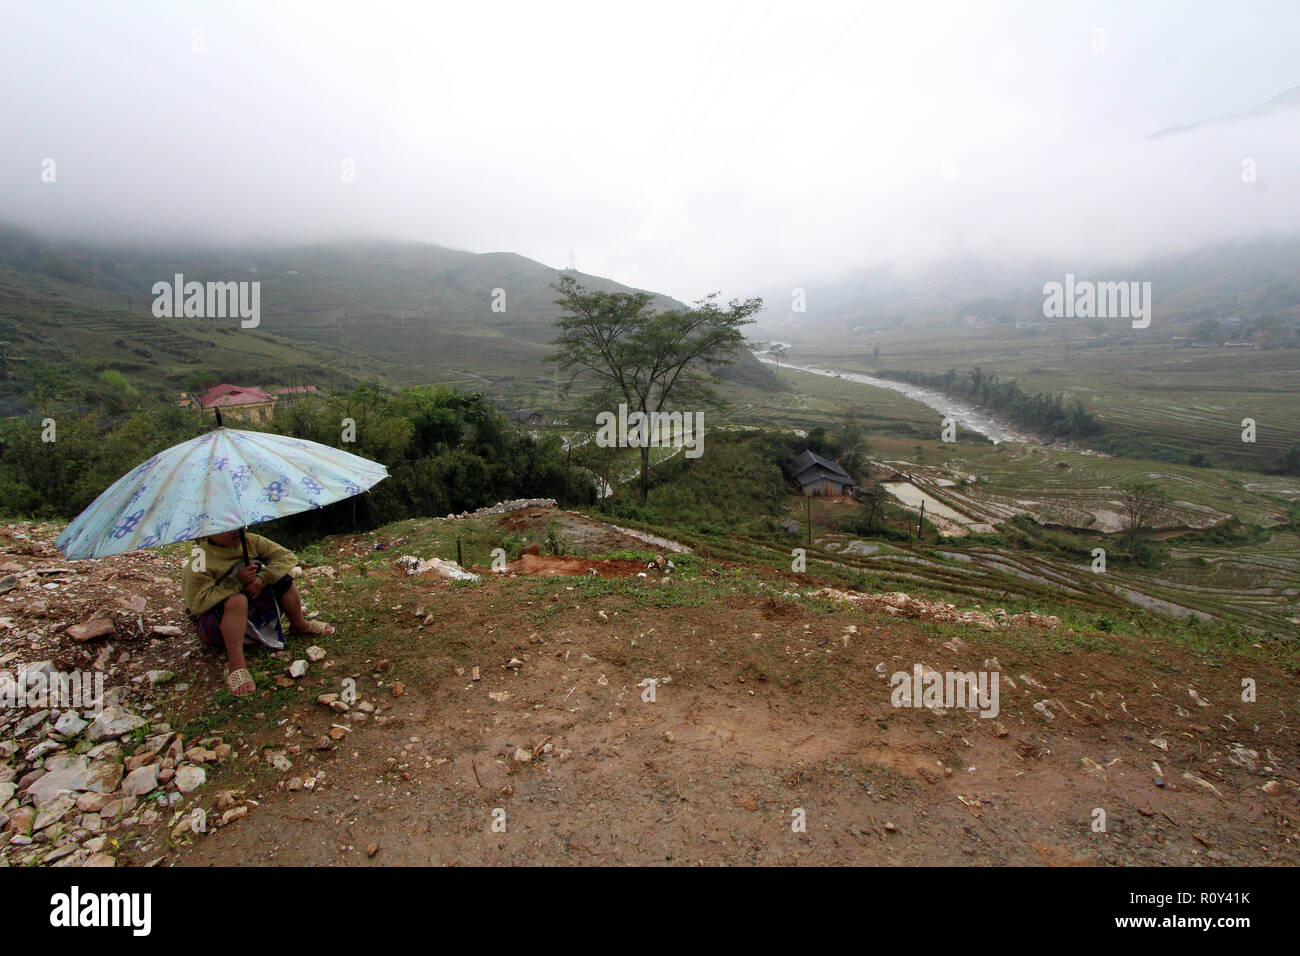 Child rests under an umbrella on a hill outside village of Sapa, VietnamBB Stock Photo